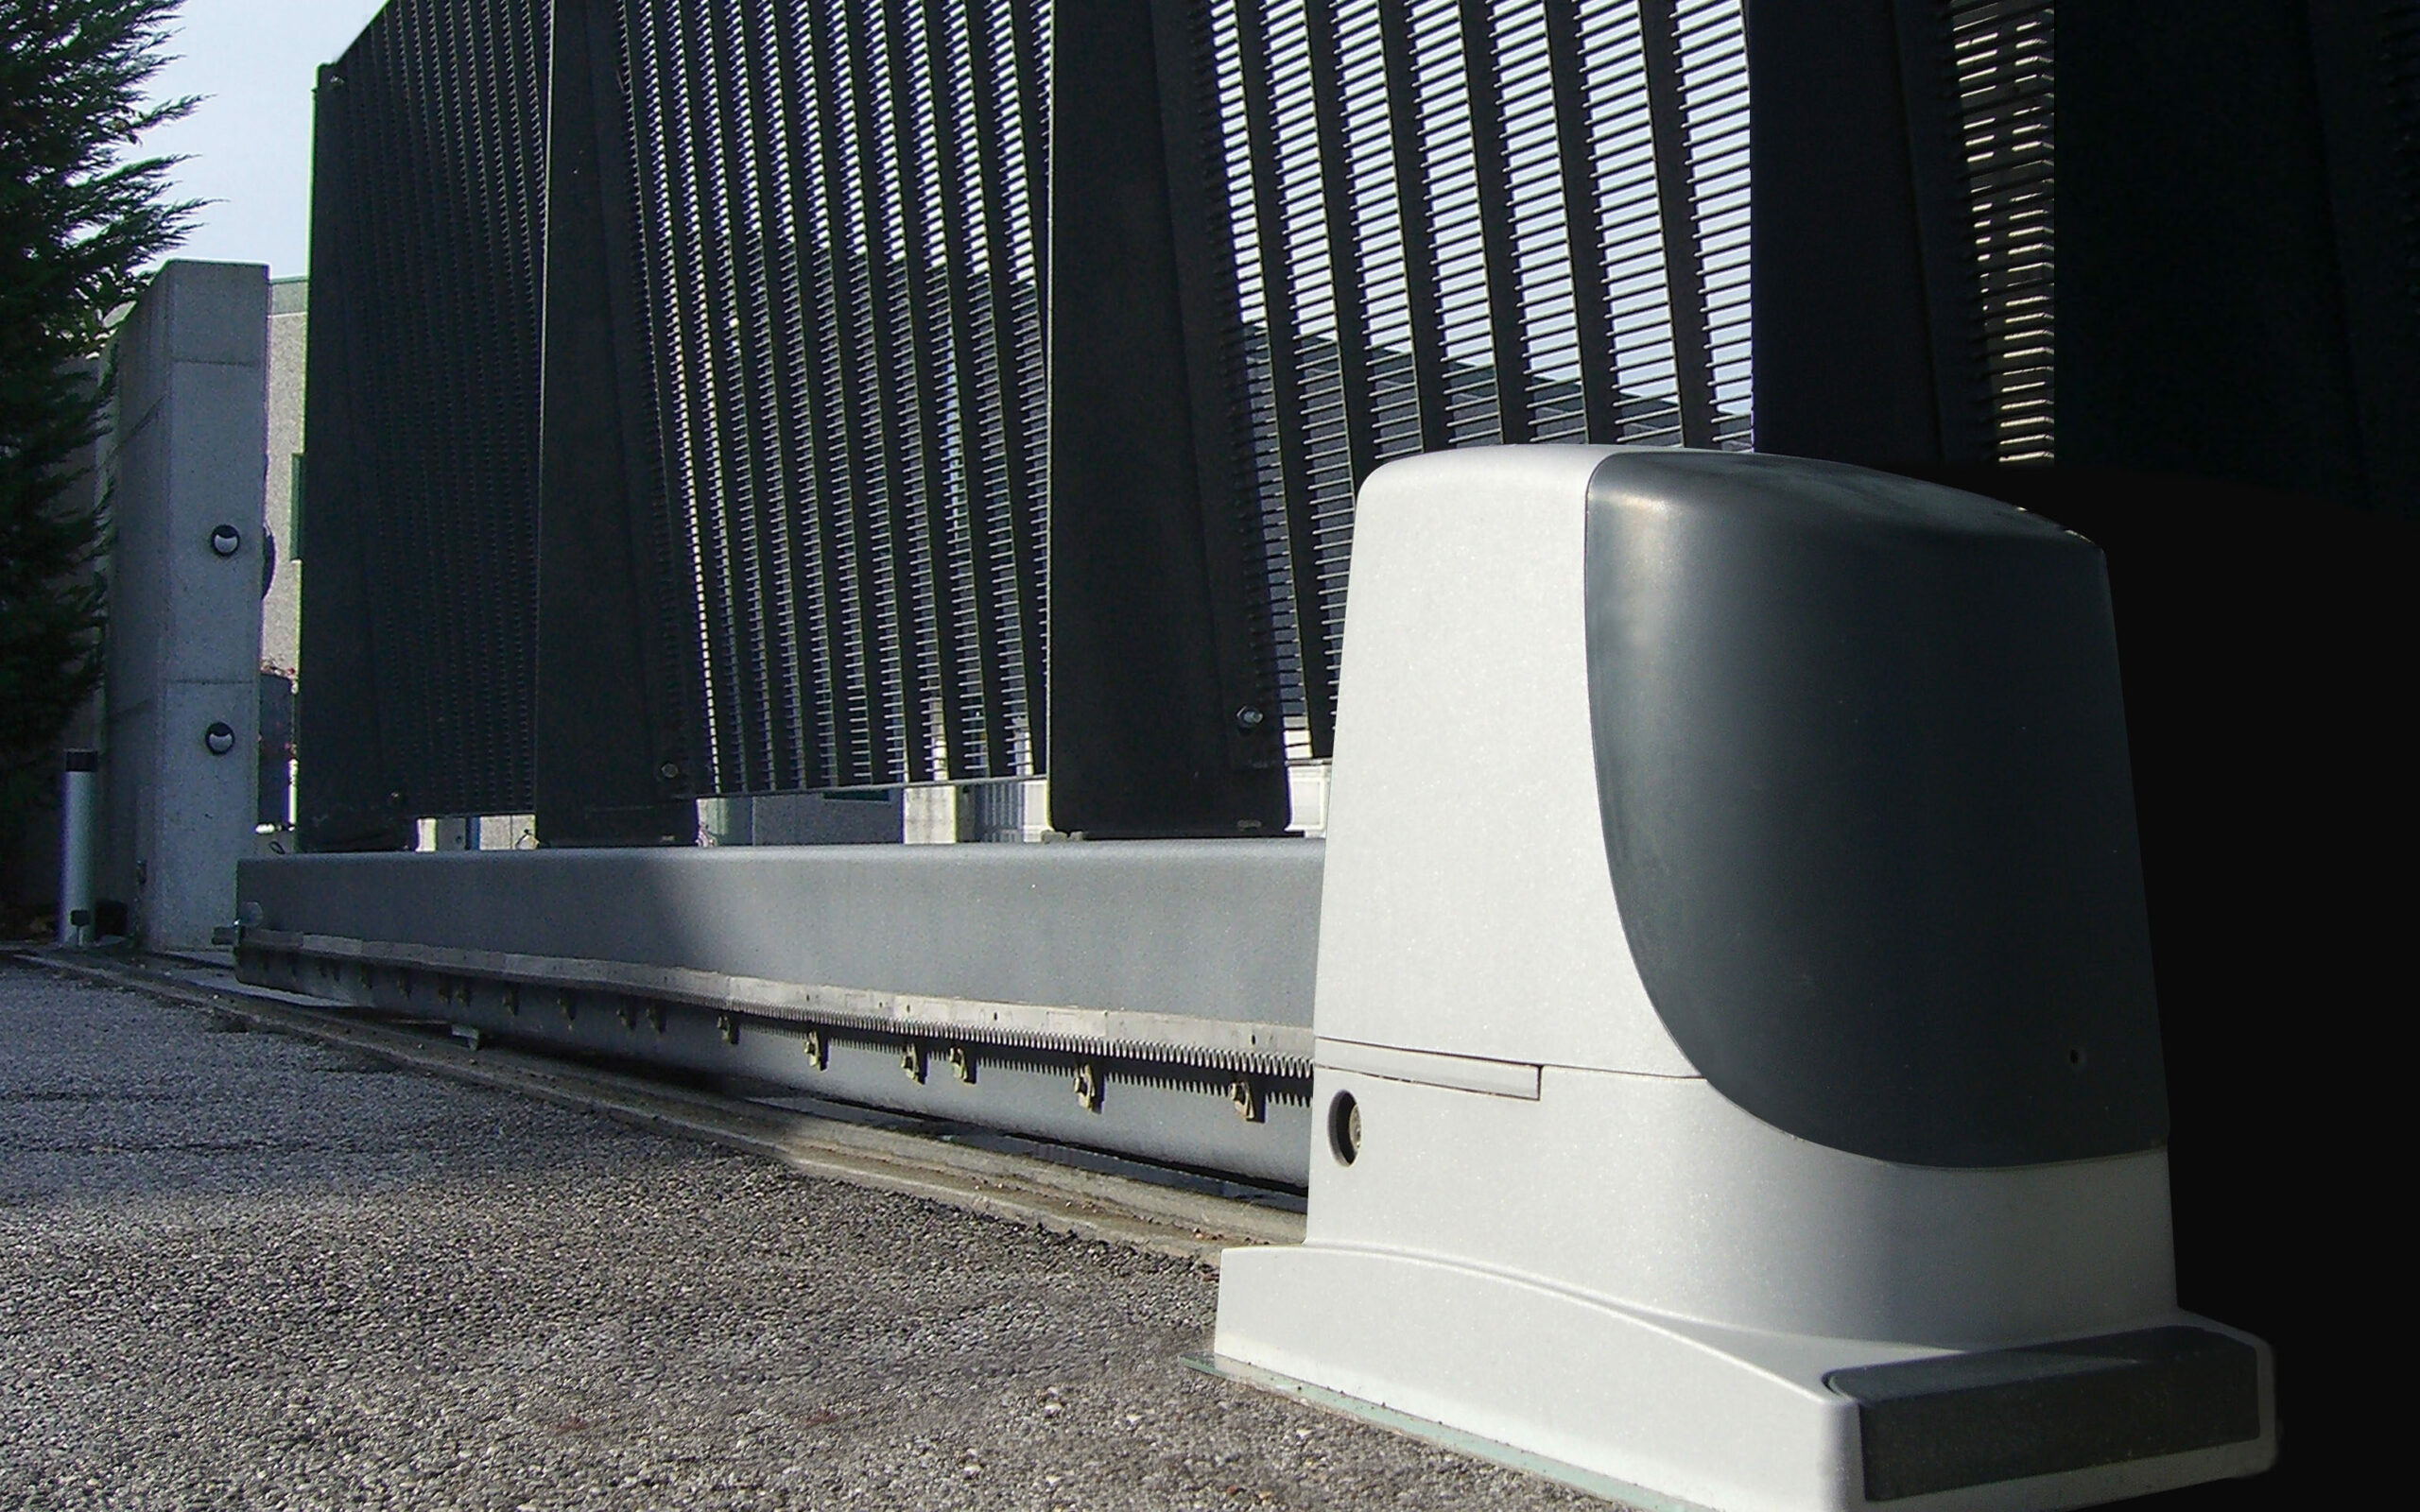 Low view of an automated electric gate system installed on large mesh gate.